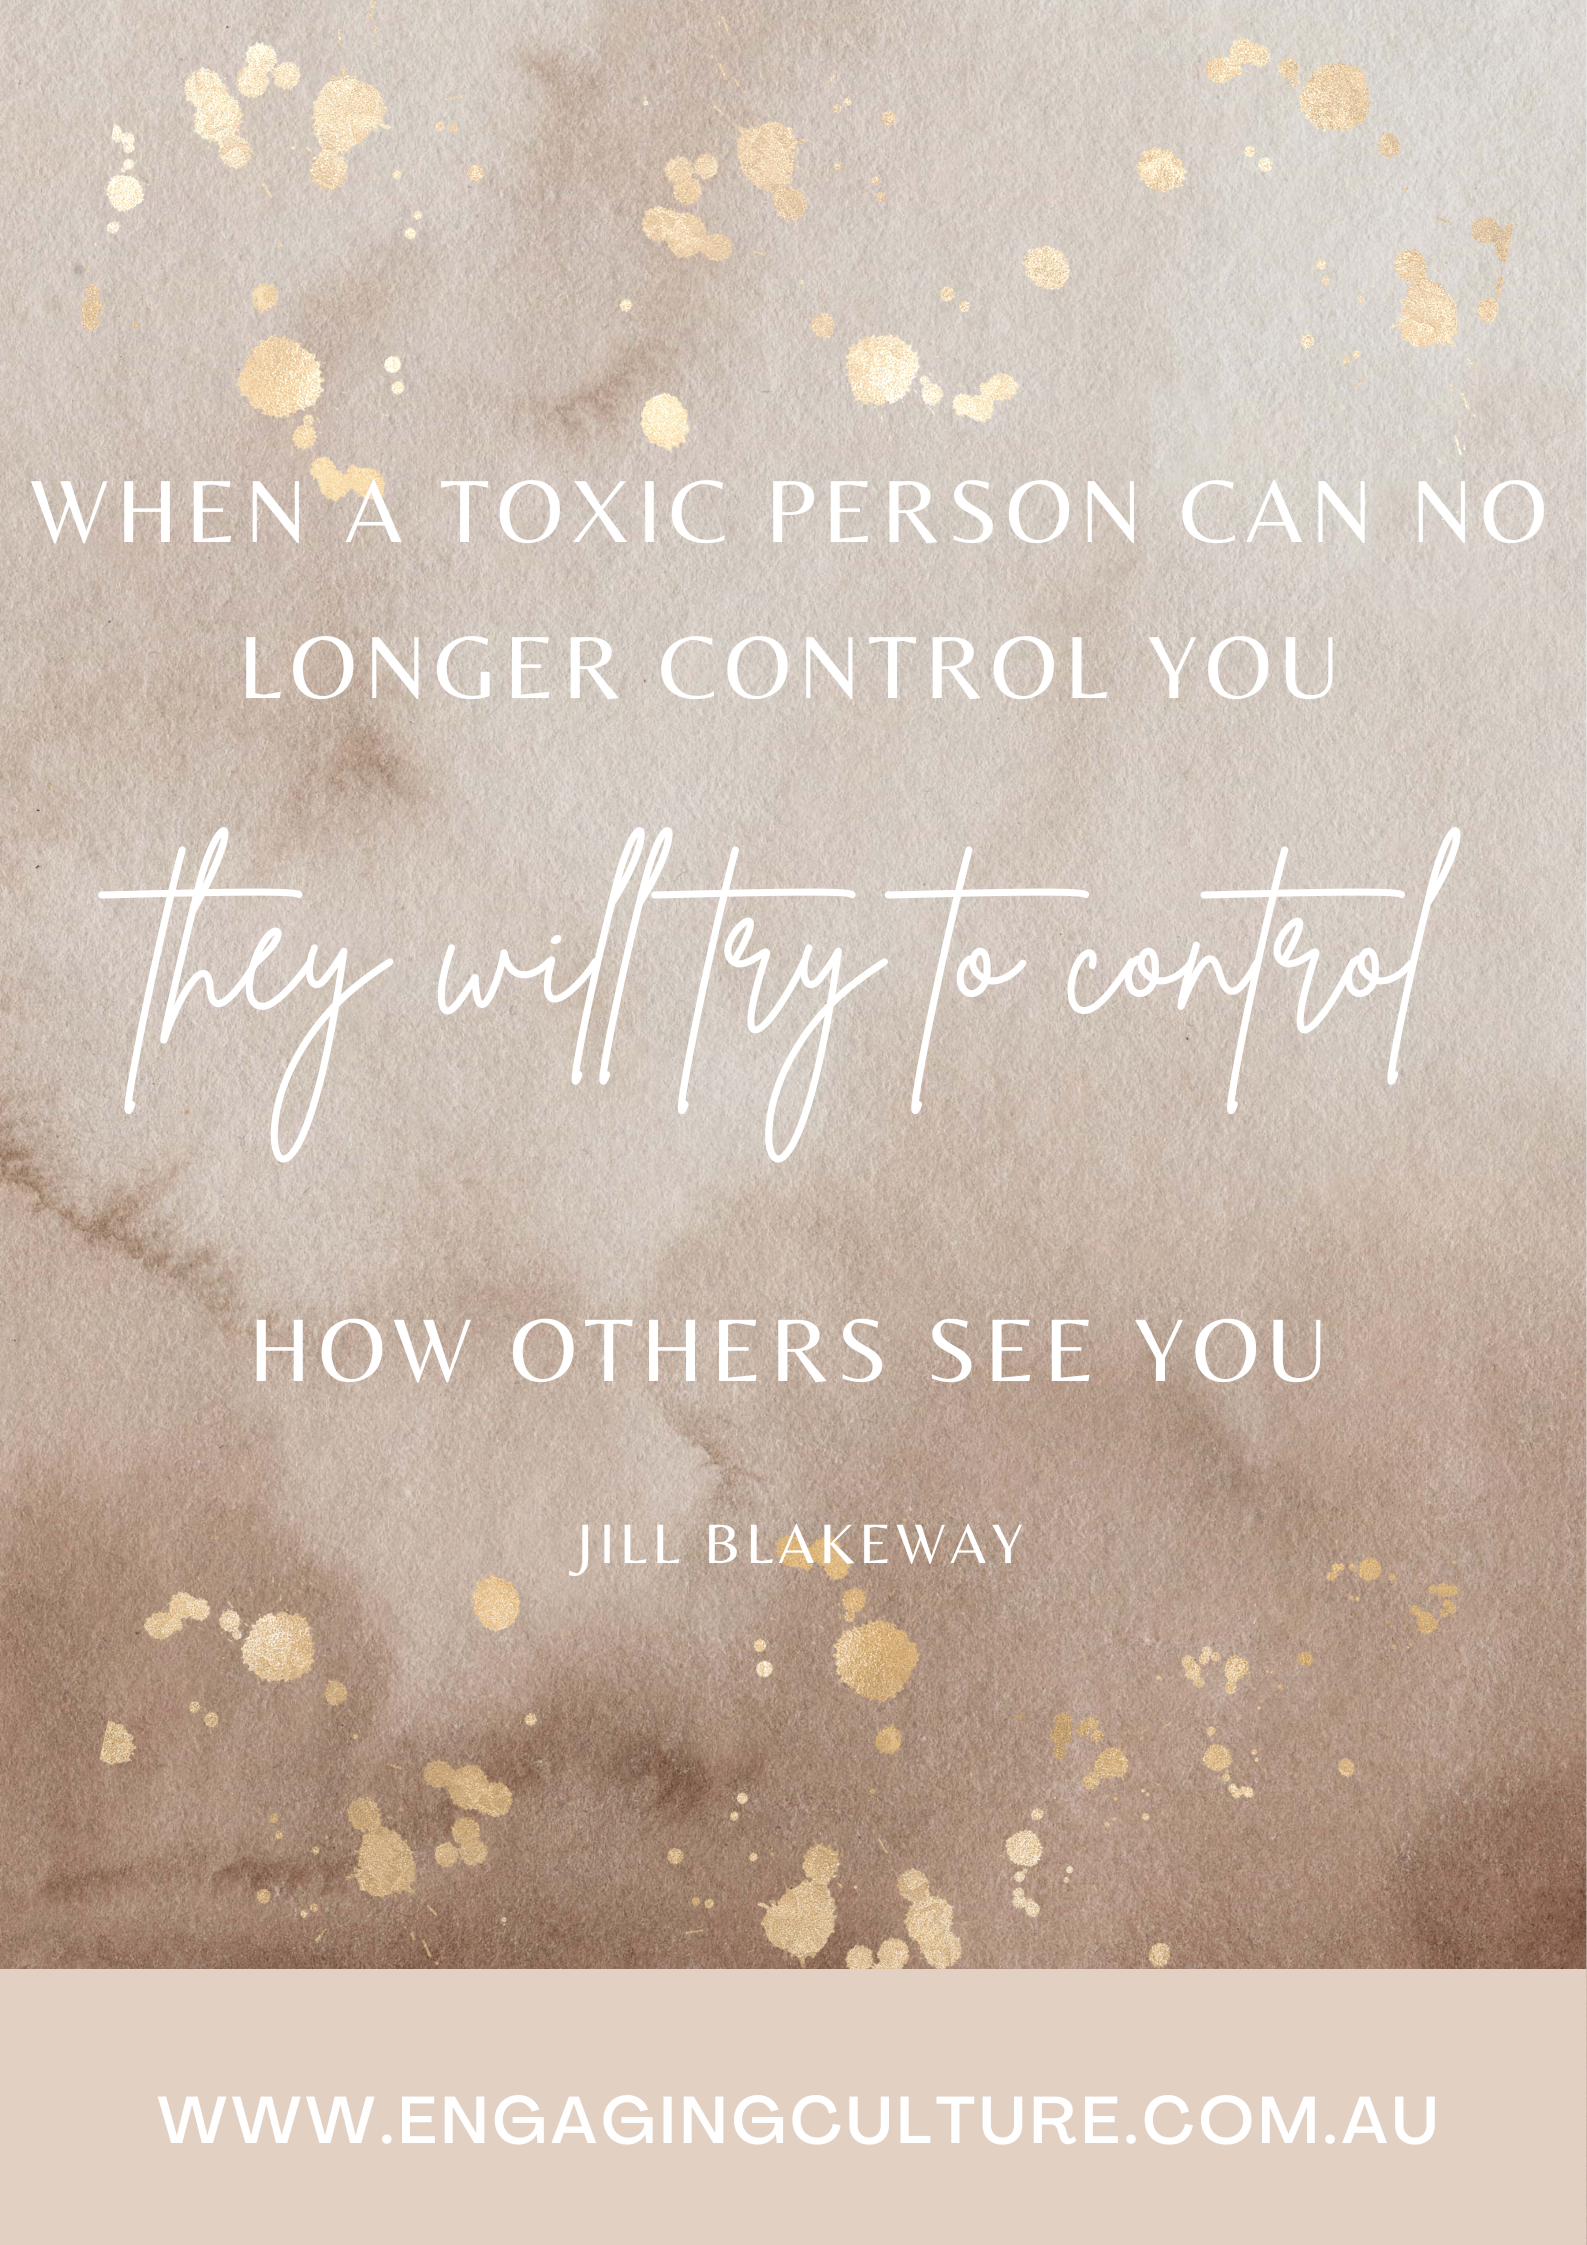 When a toxic person can lo longer control you they will try to control how others see you